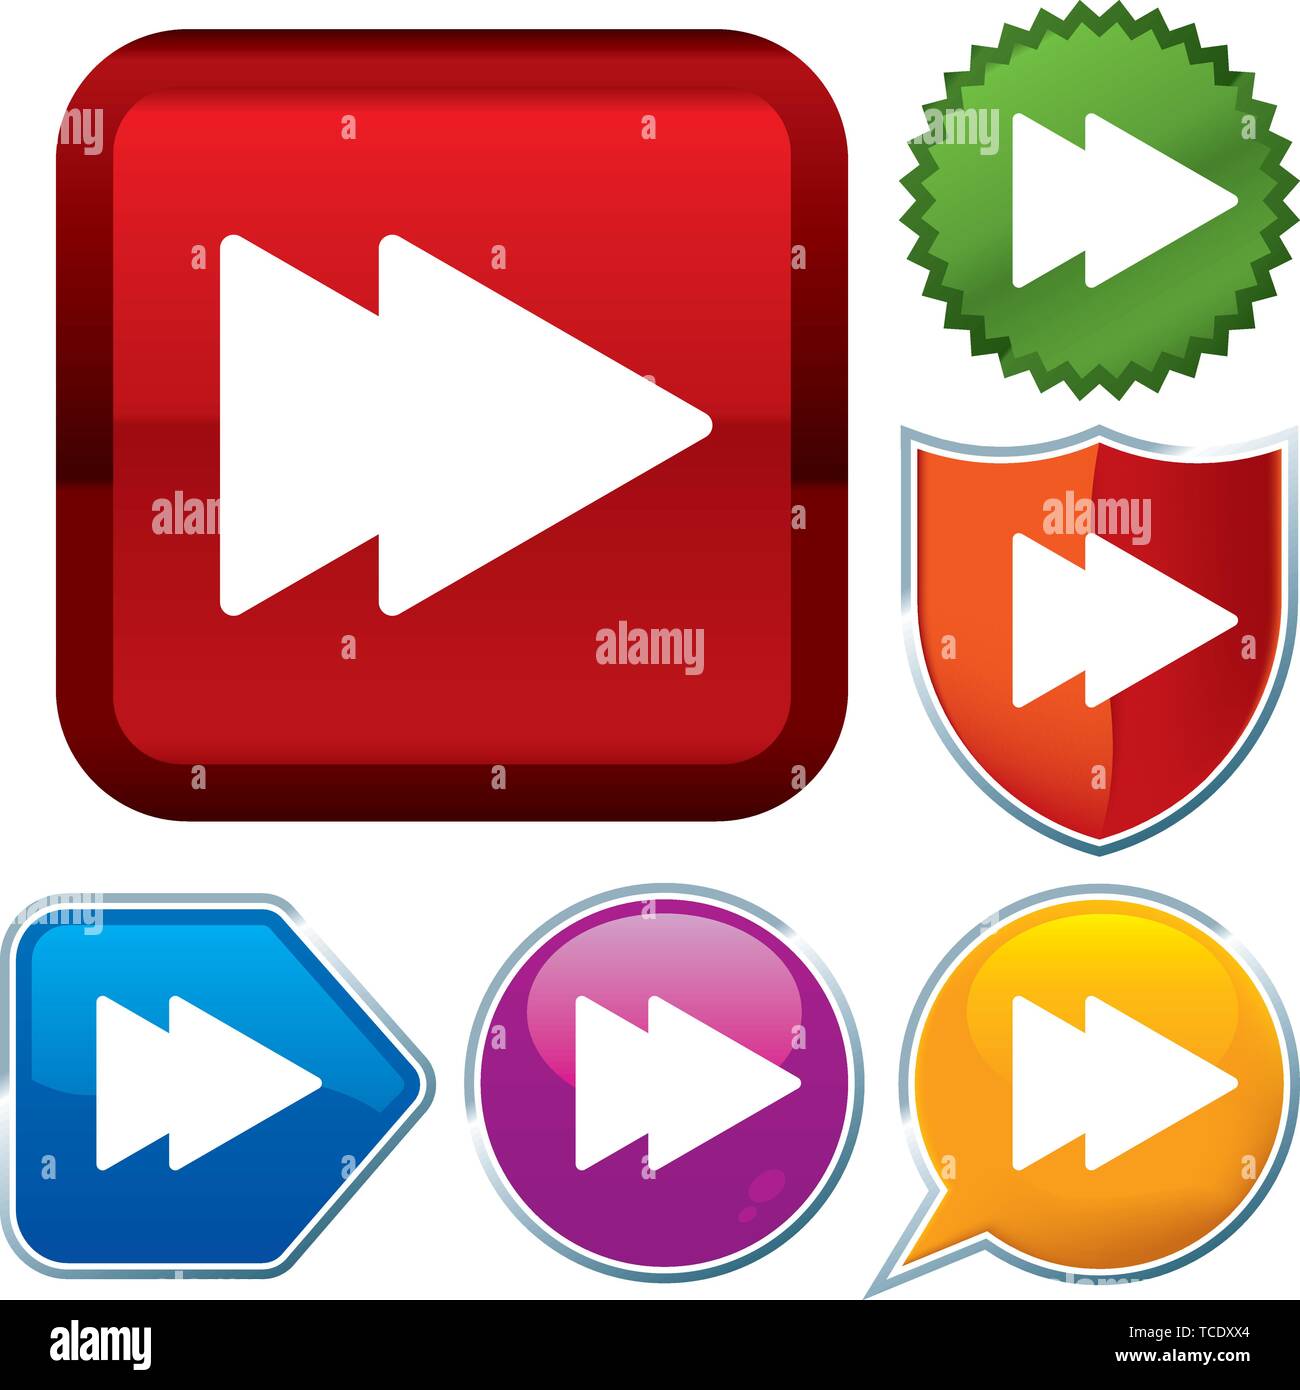 Vector illustration. Set shiny icon series on buttons. Fast. Stock Vector